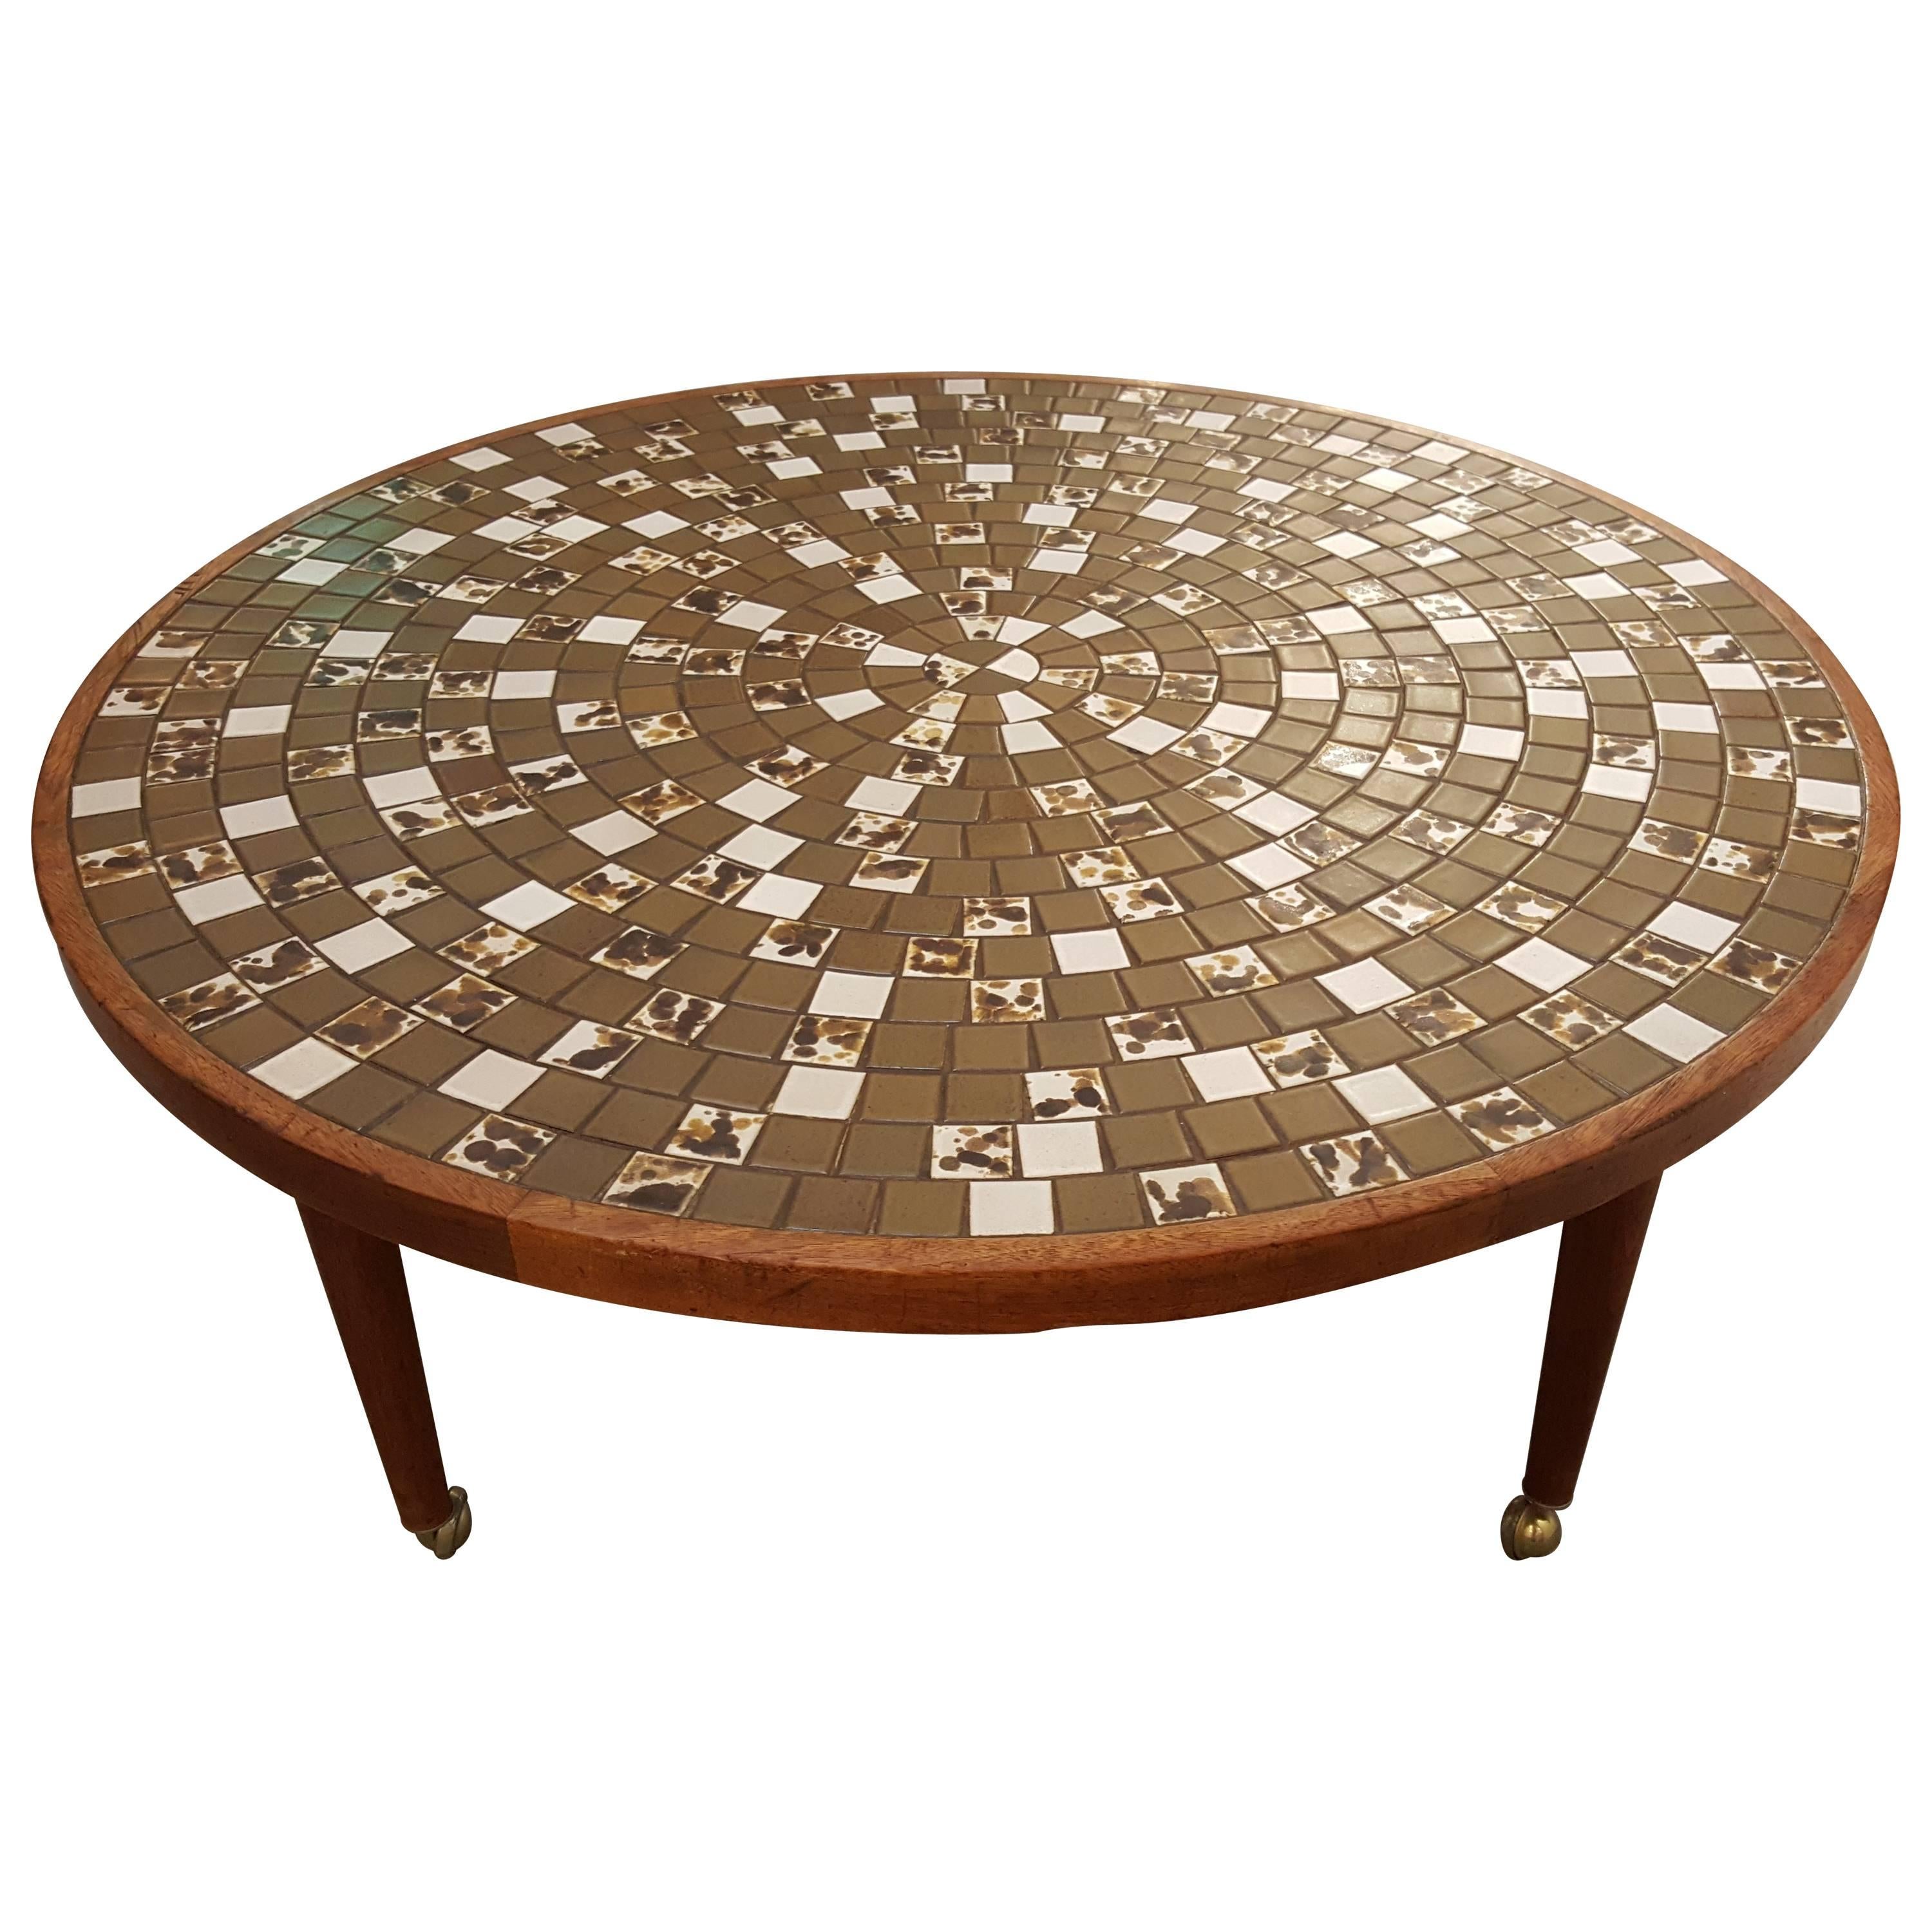 Circular Mosaic Tile Coffee Table by Gordon and Jane Martz For Sale